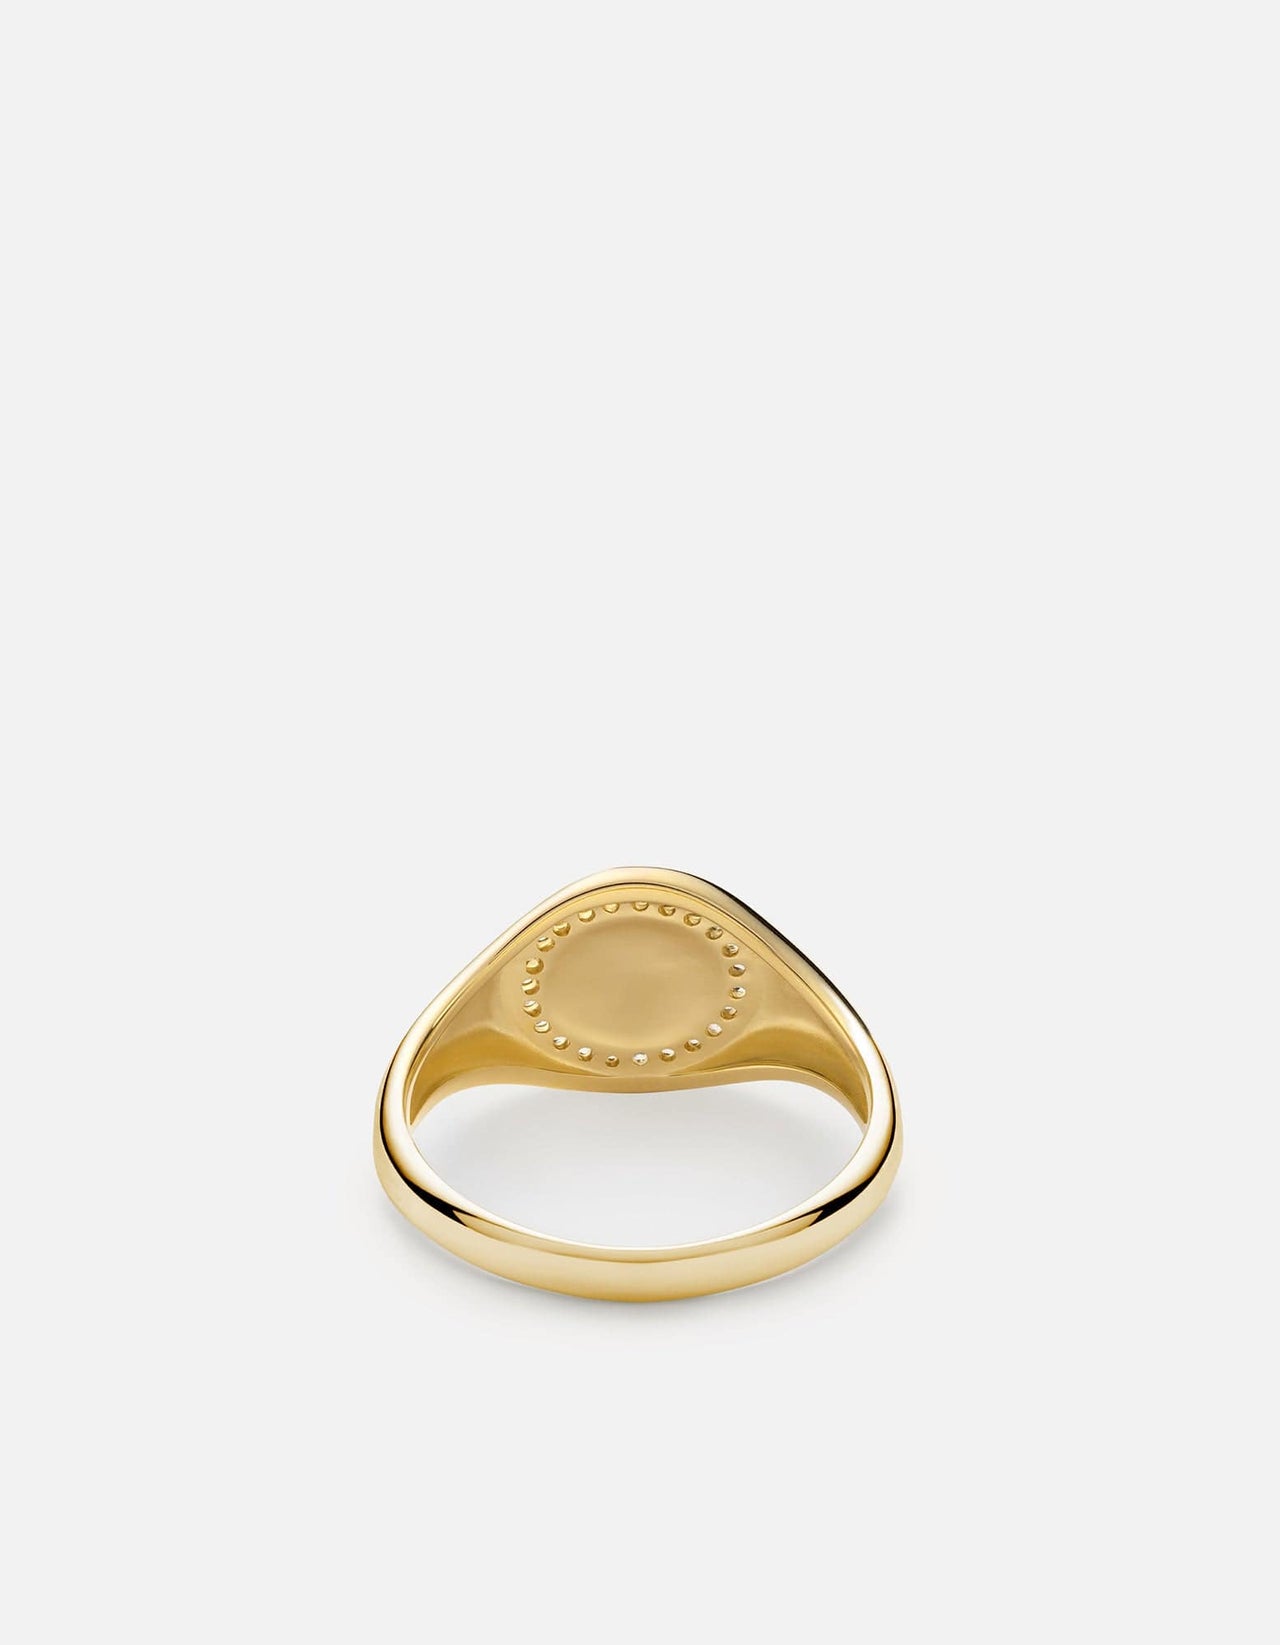 Halo Signet Ring, 14k Yellow Gold w/Pave, Polished | Women's Rings ...